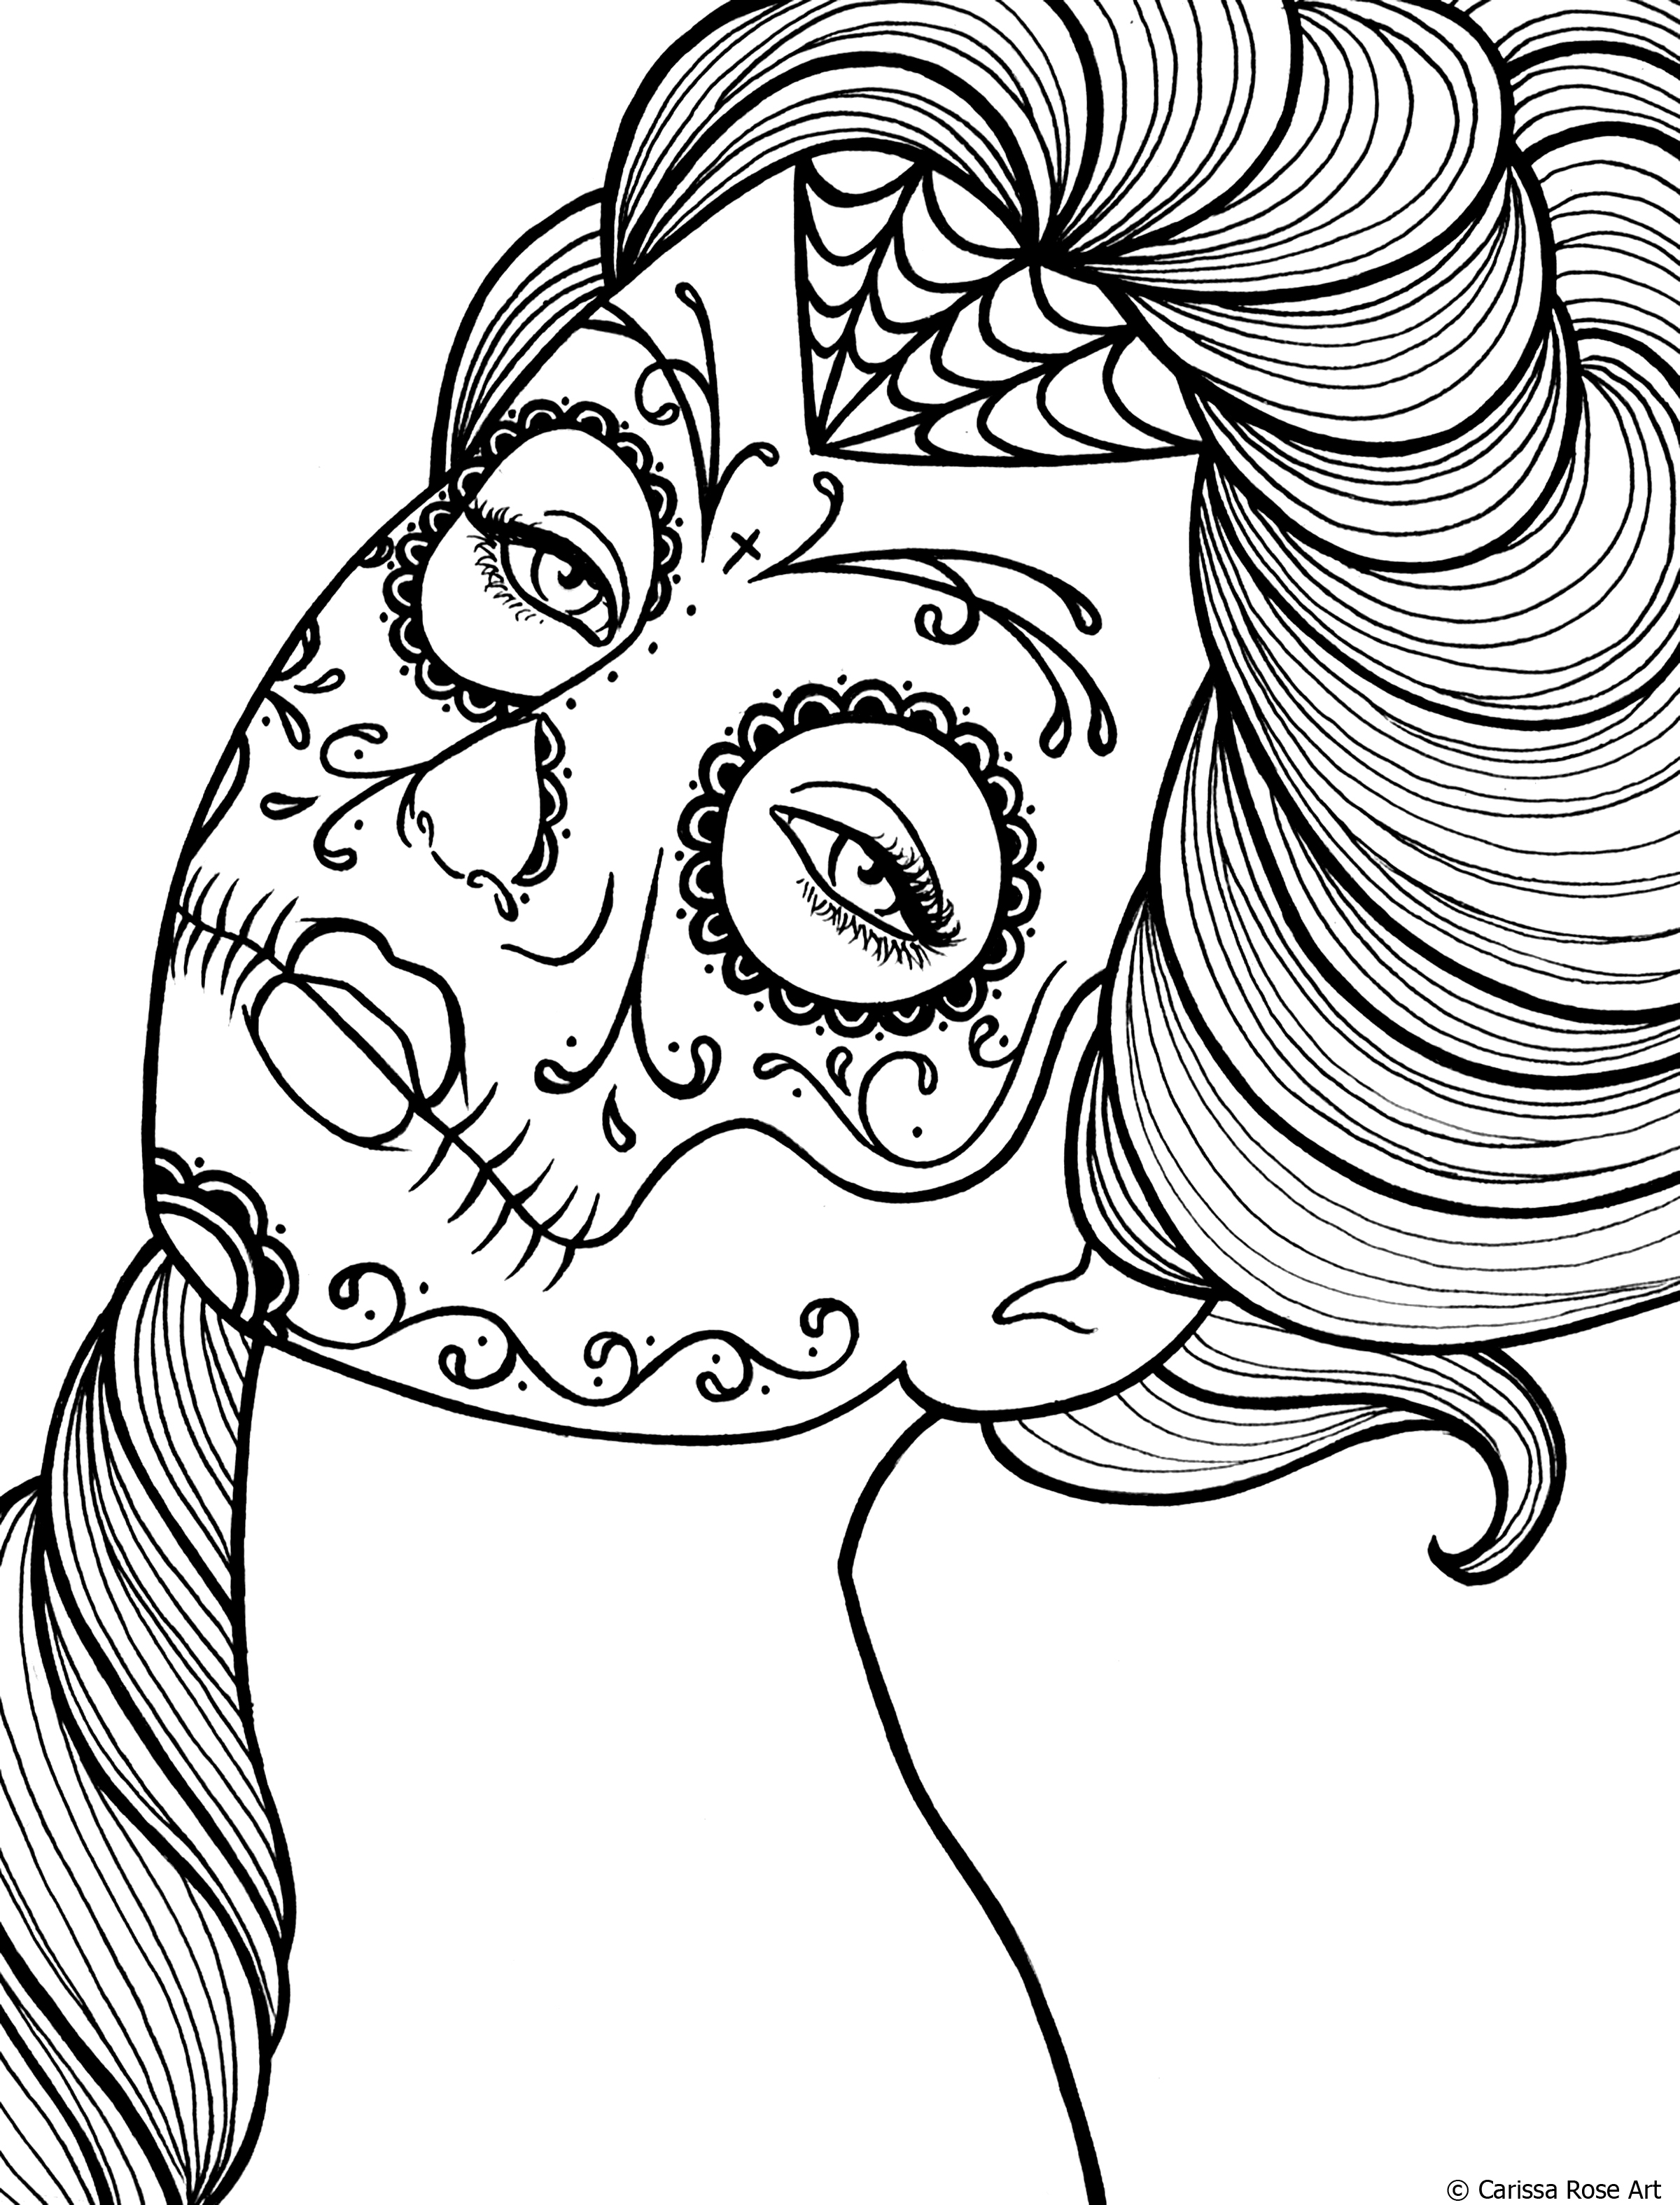 Free printable day of the dead coloring book page by misscarissarose on